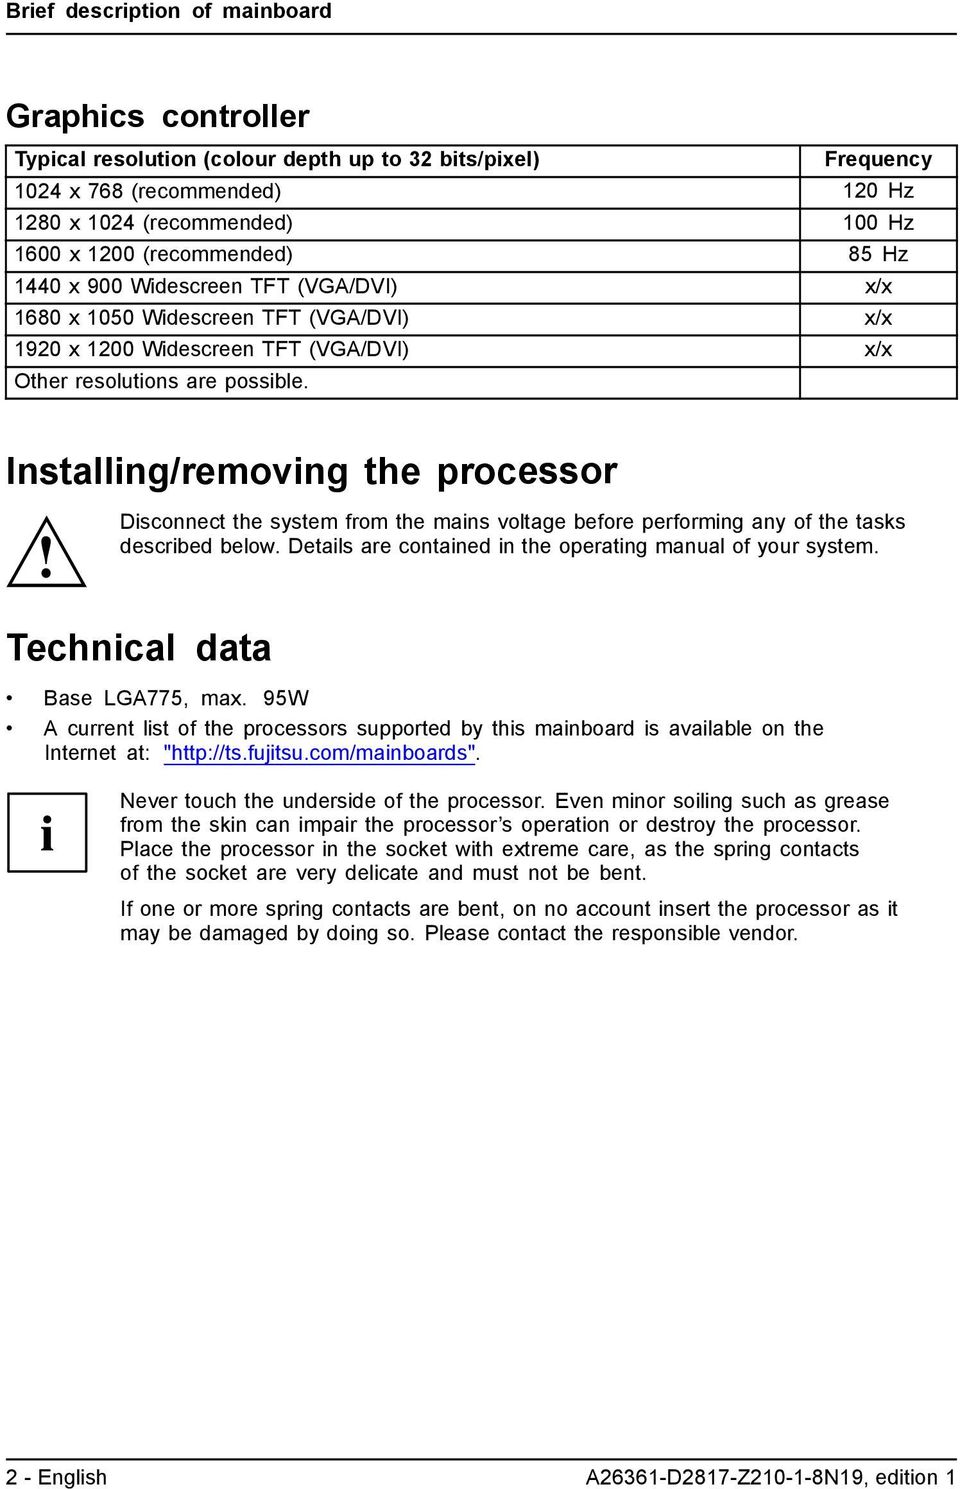 Installing/removing the processor Disconnect the system from the mains voltage before performing any of the tasks described below. Details are contained in the operating manual of your system.